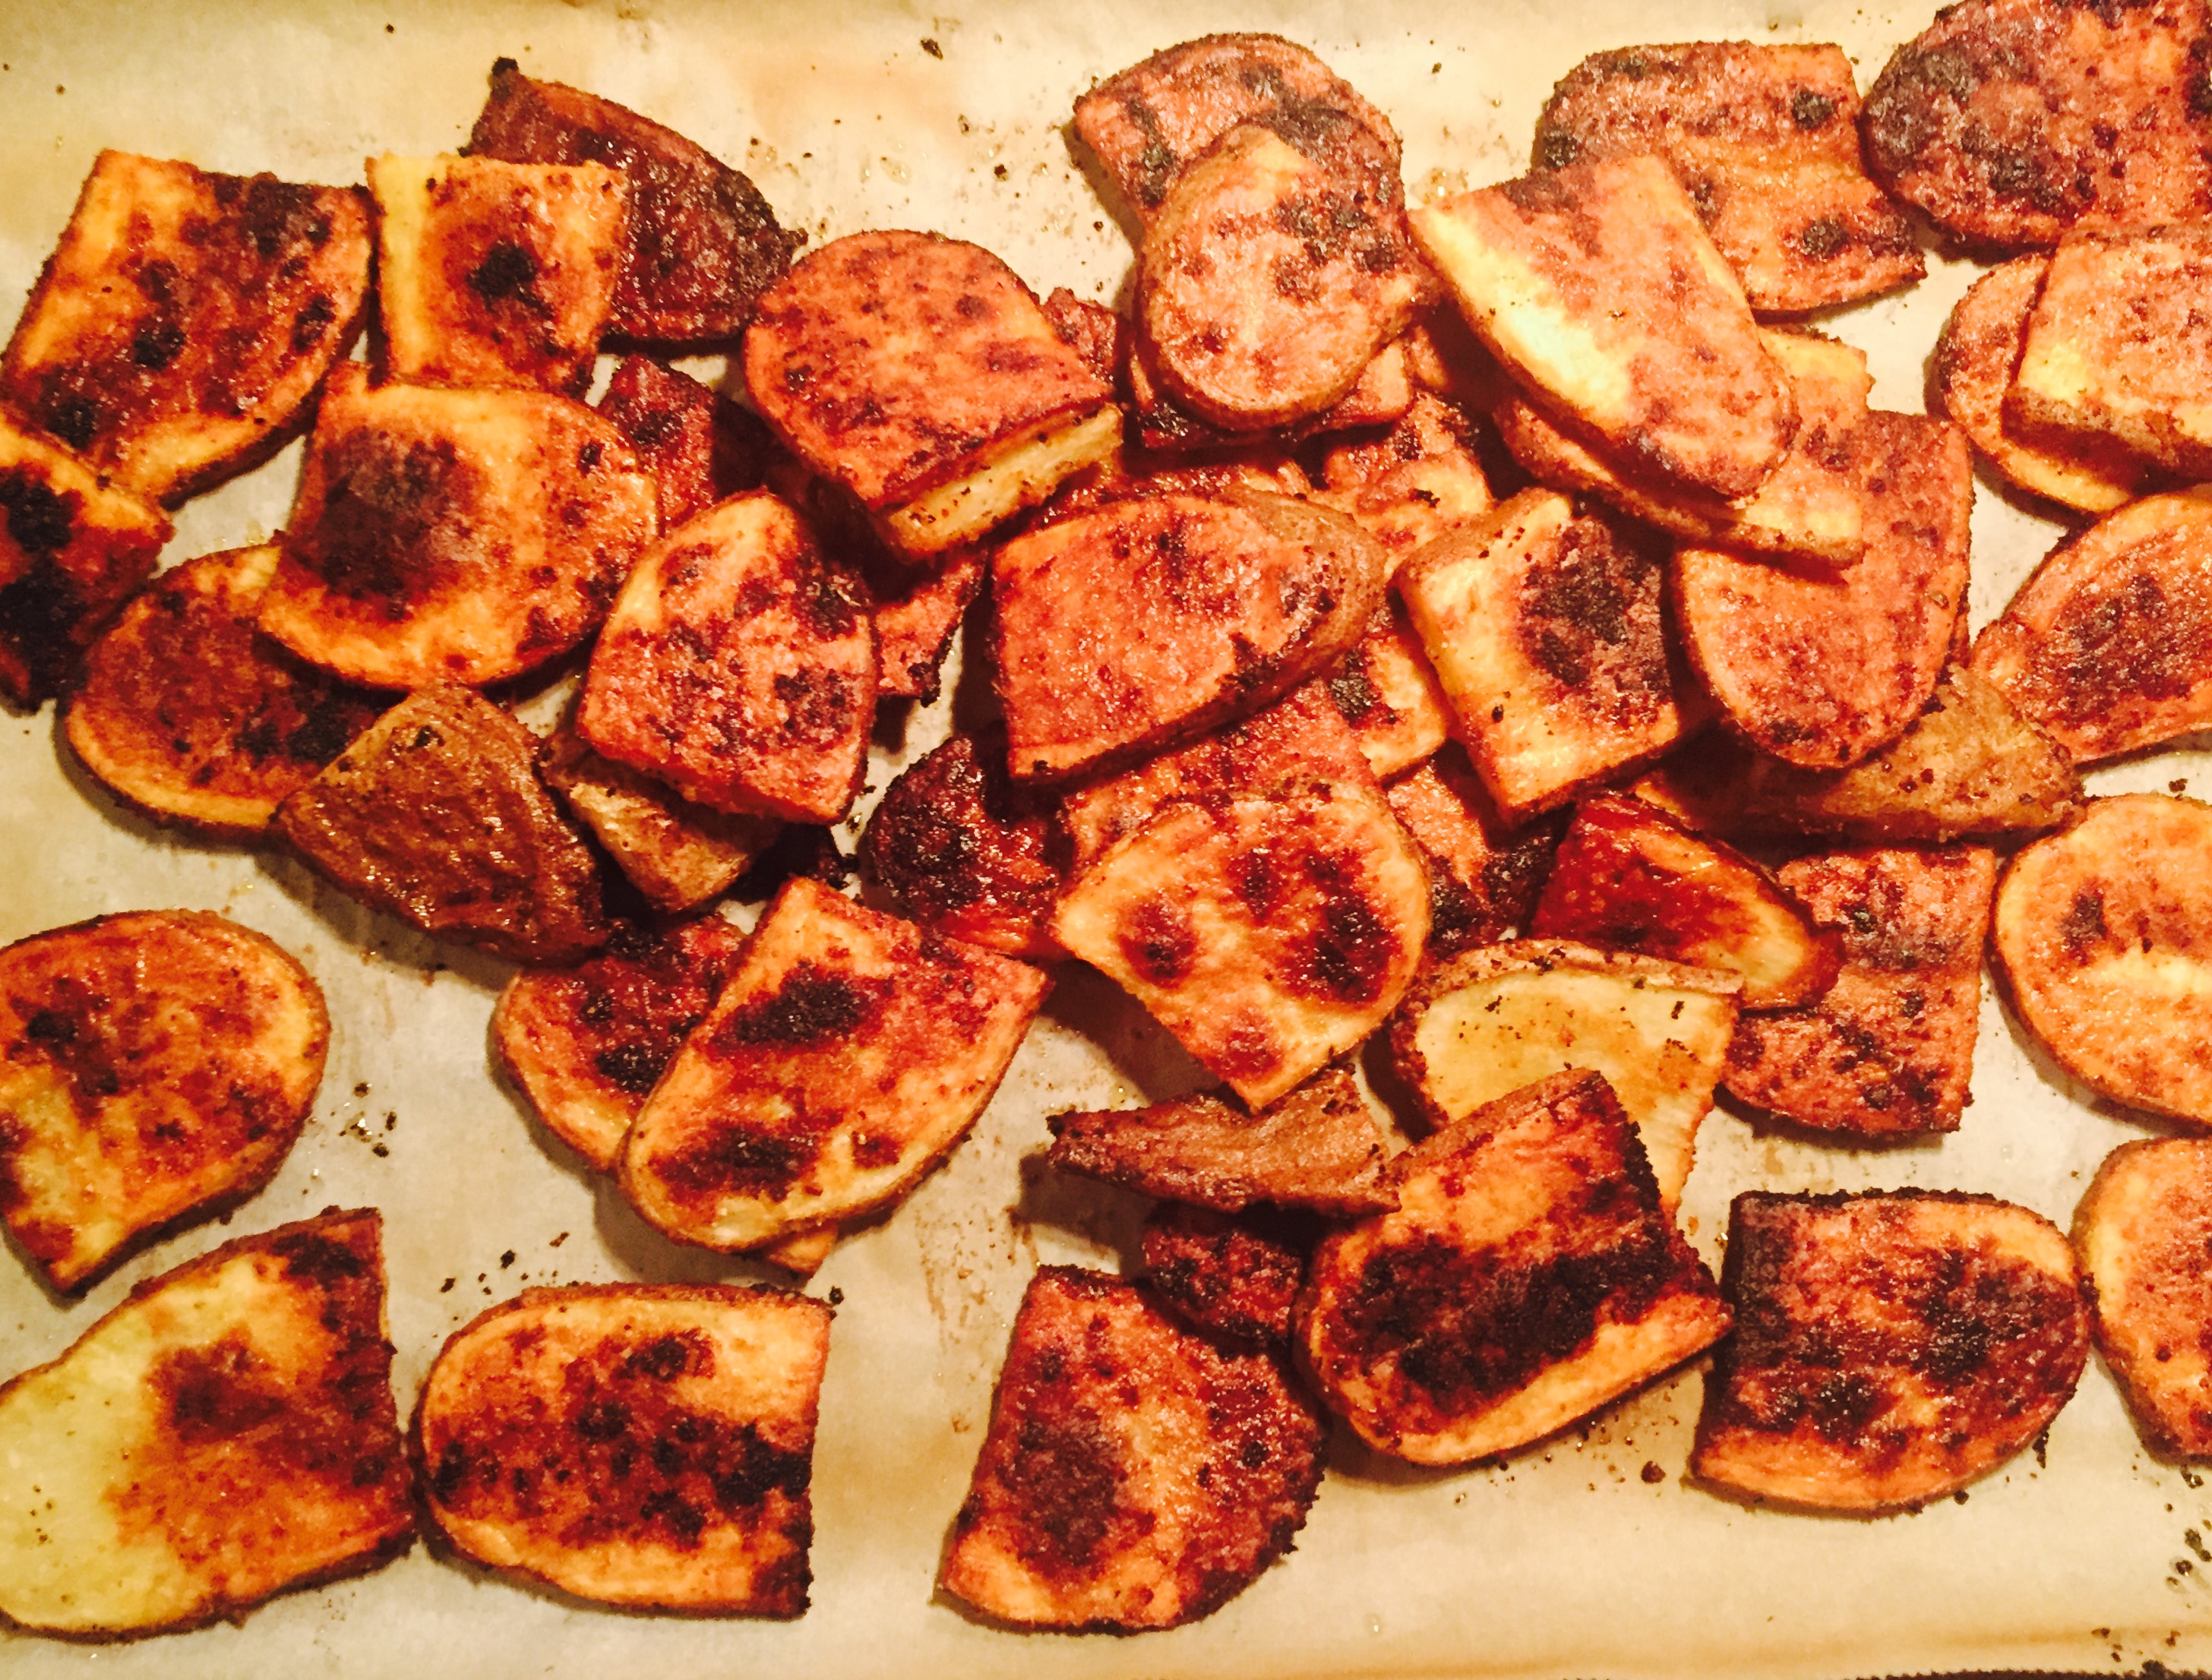 Oven roasted russet potato slices